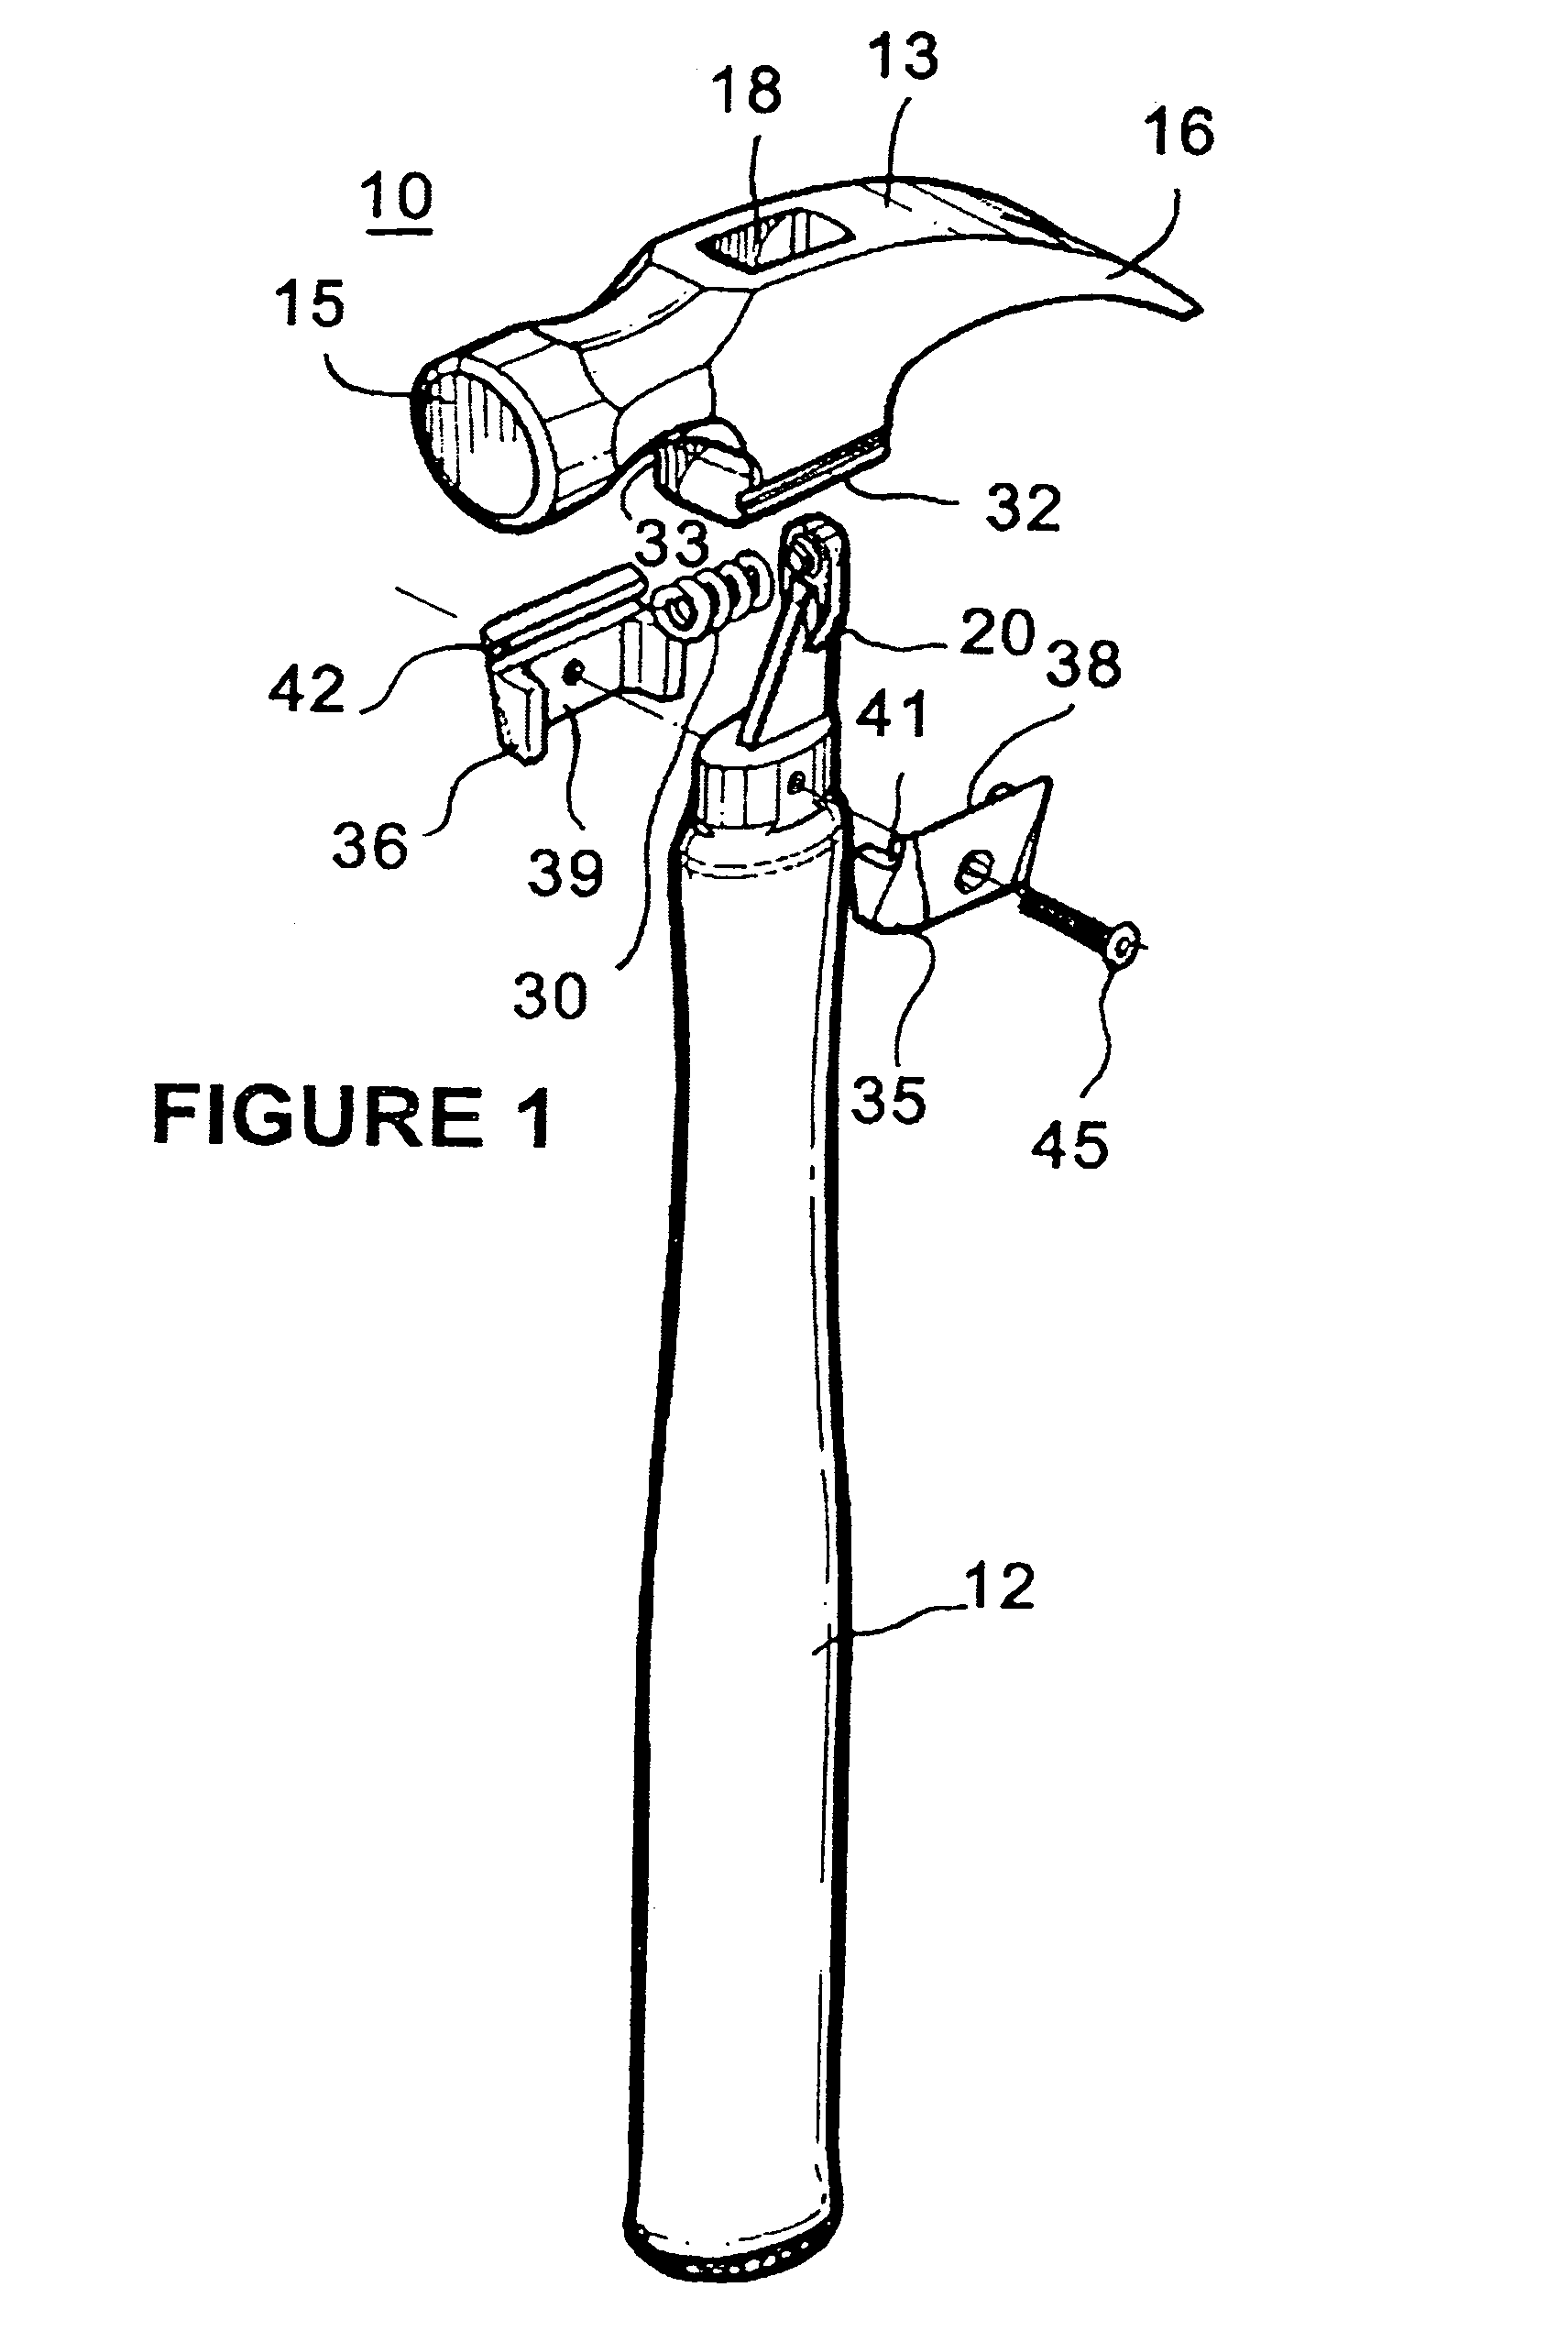 Recoiling striking device